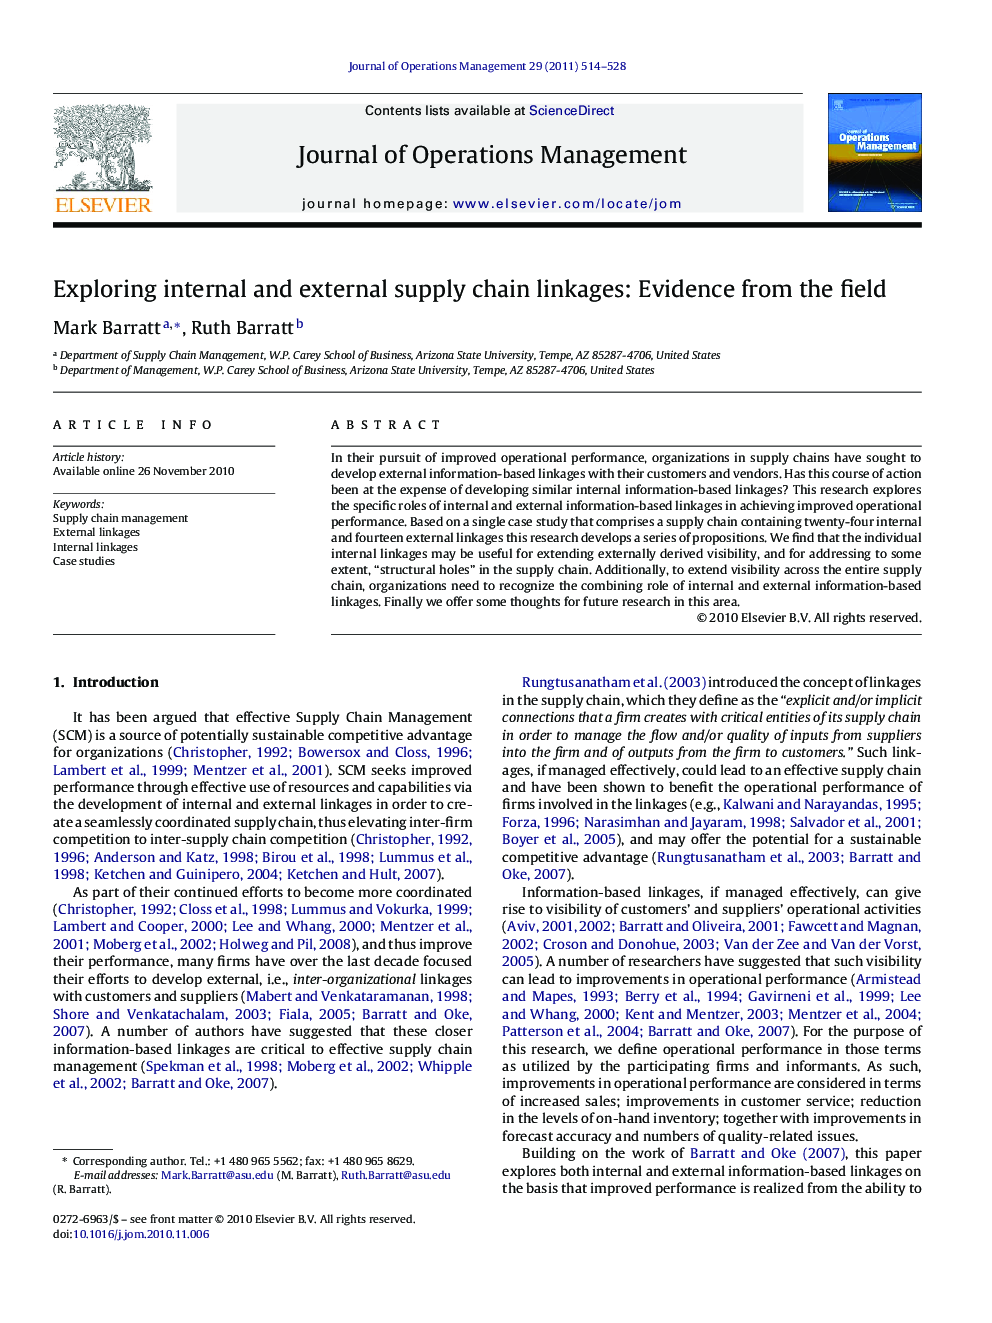 Exploring internal and external supply chain linkages: Evidence from the field